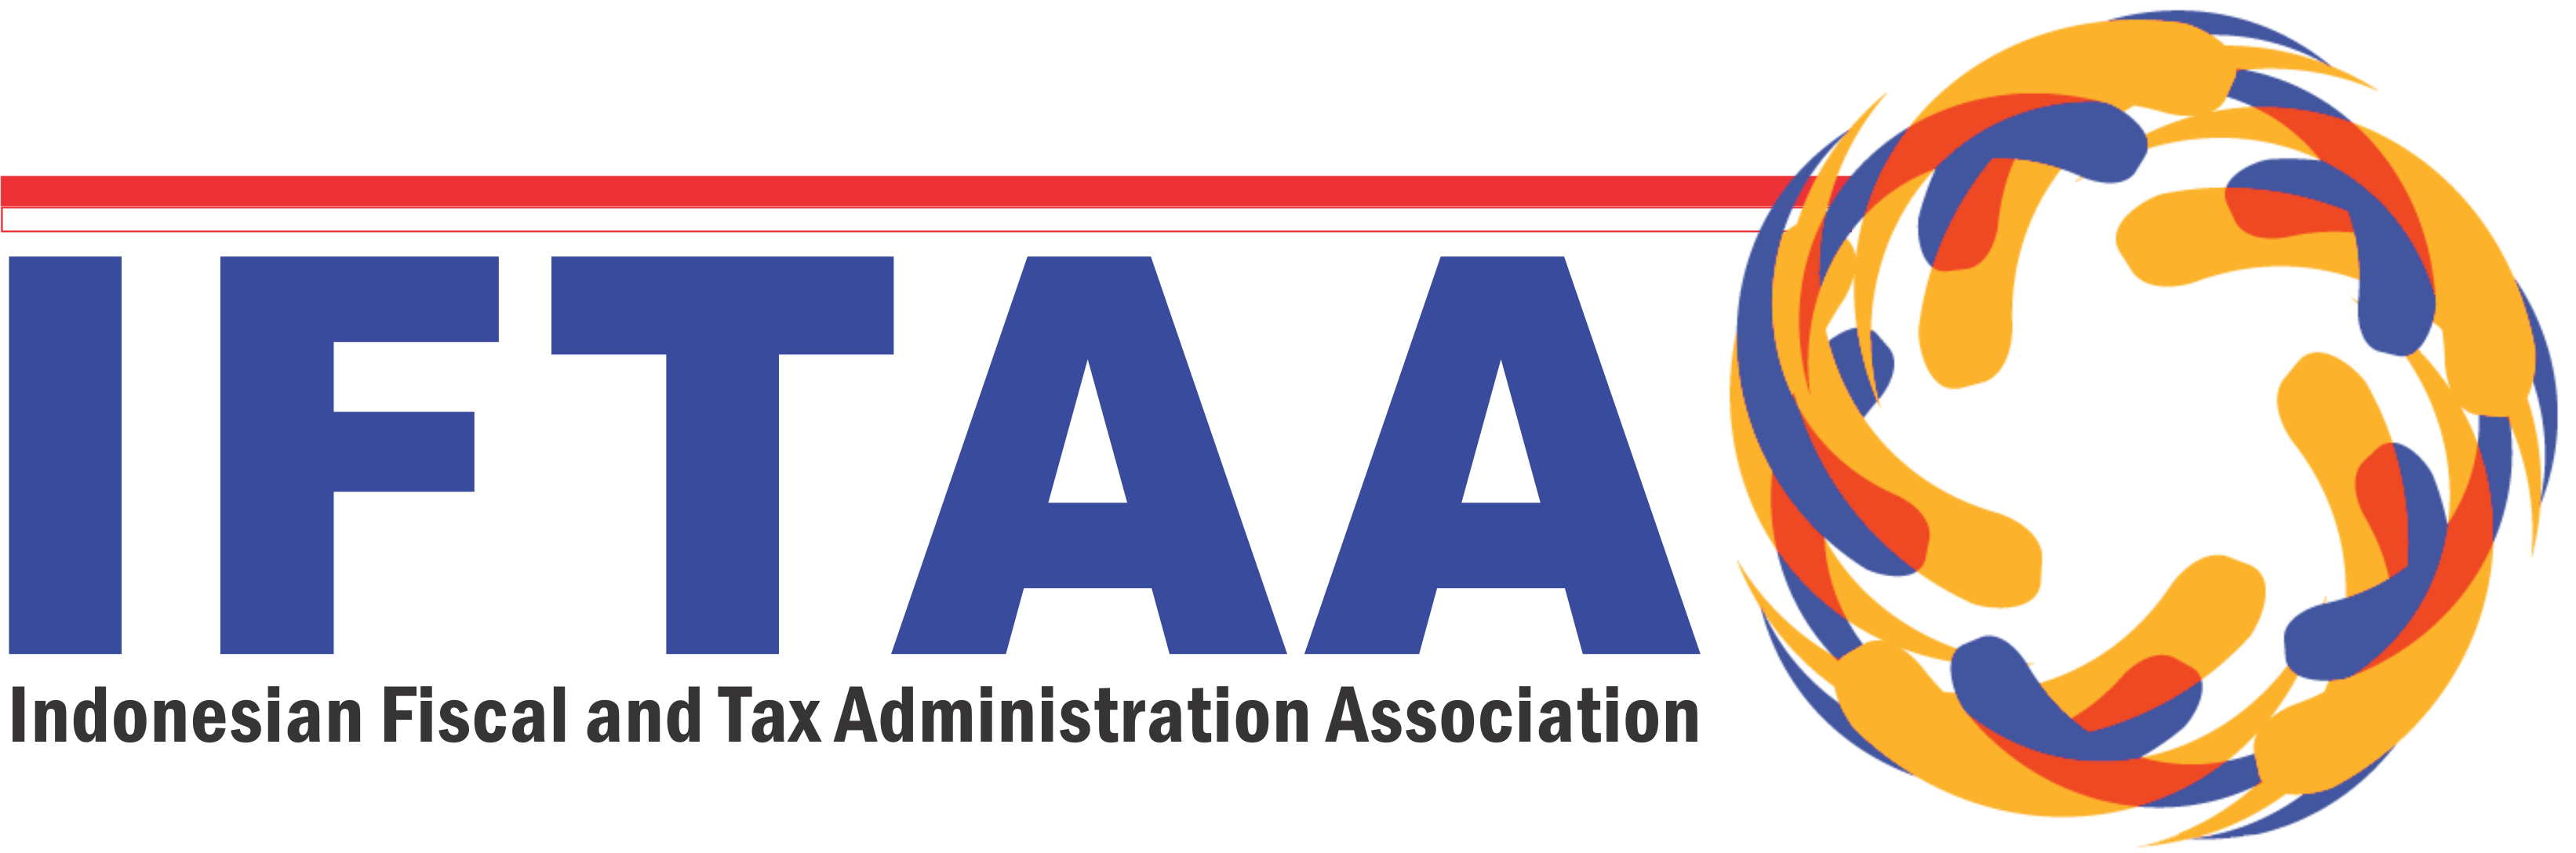 Indonesian Fiscal and Tax Administration Association logo